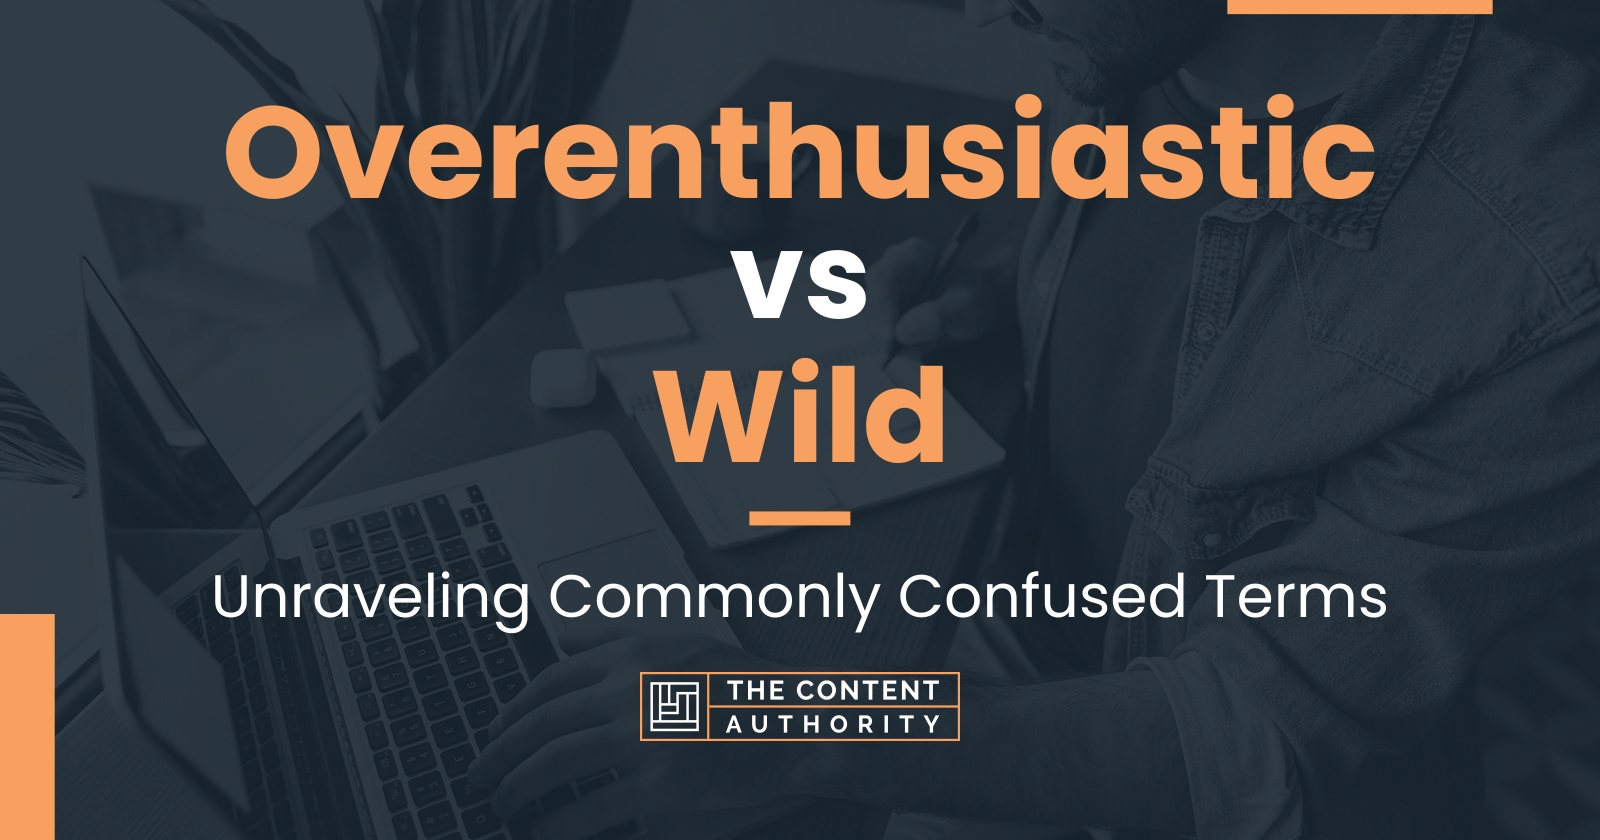 Overenthusiastic Vs Wild Unraveling Commonly Confused Terms 9958